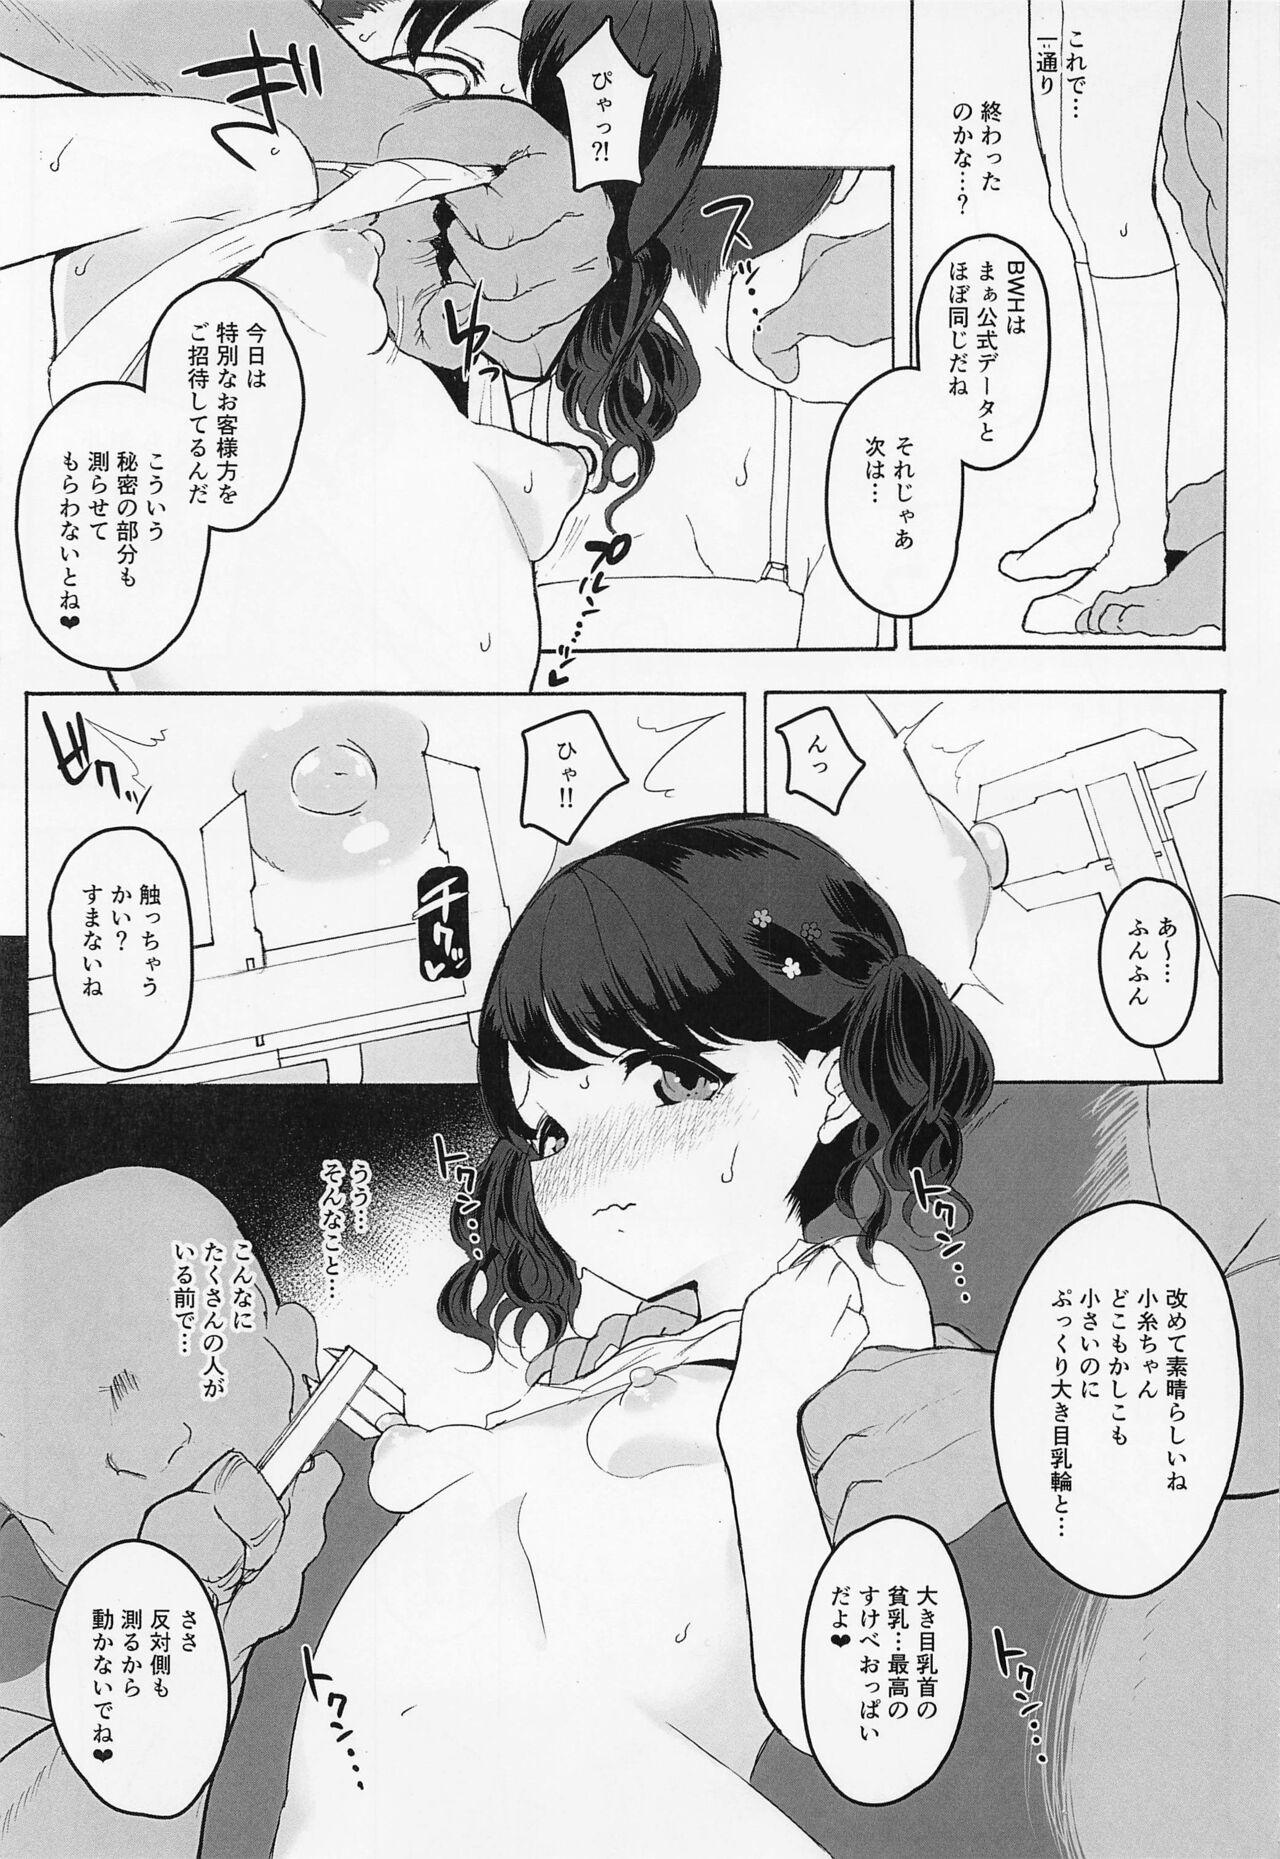 Pounded Majime de Doryokuka datte. 2 - The idolmaster Cum Swallowing - Page 10